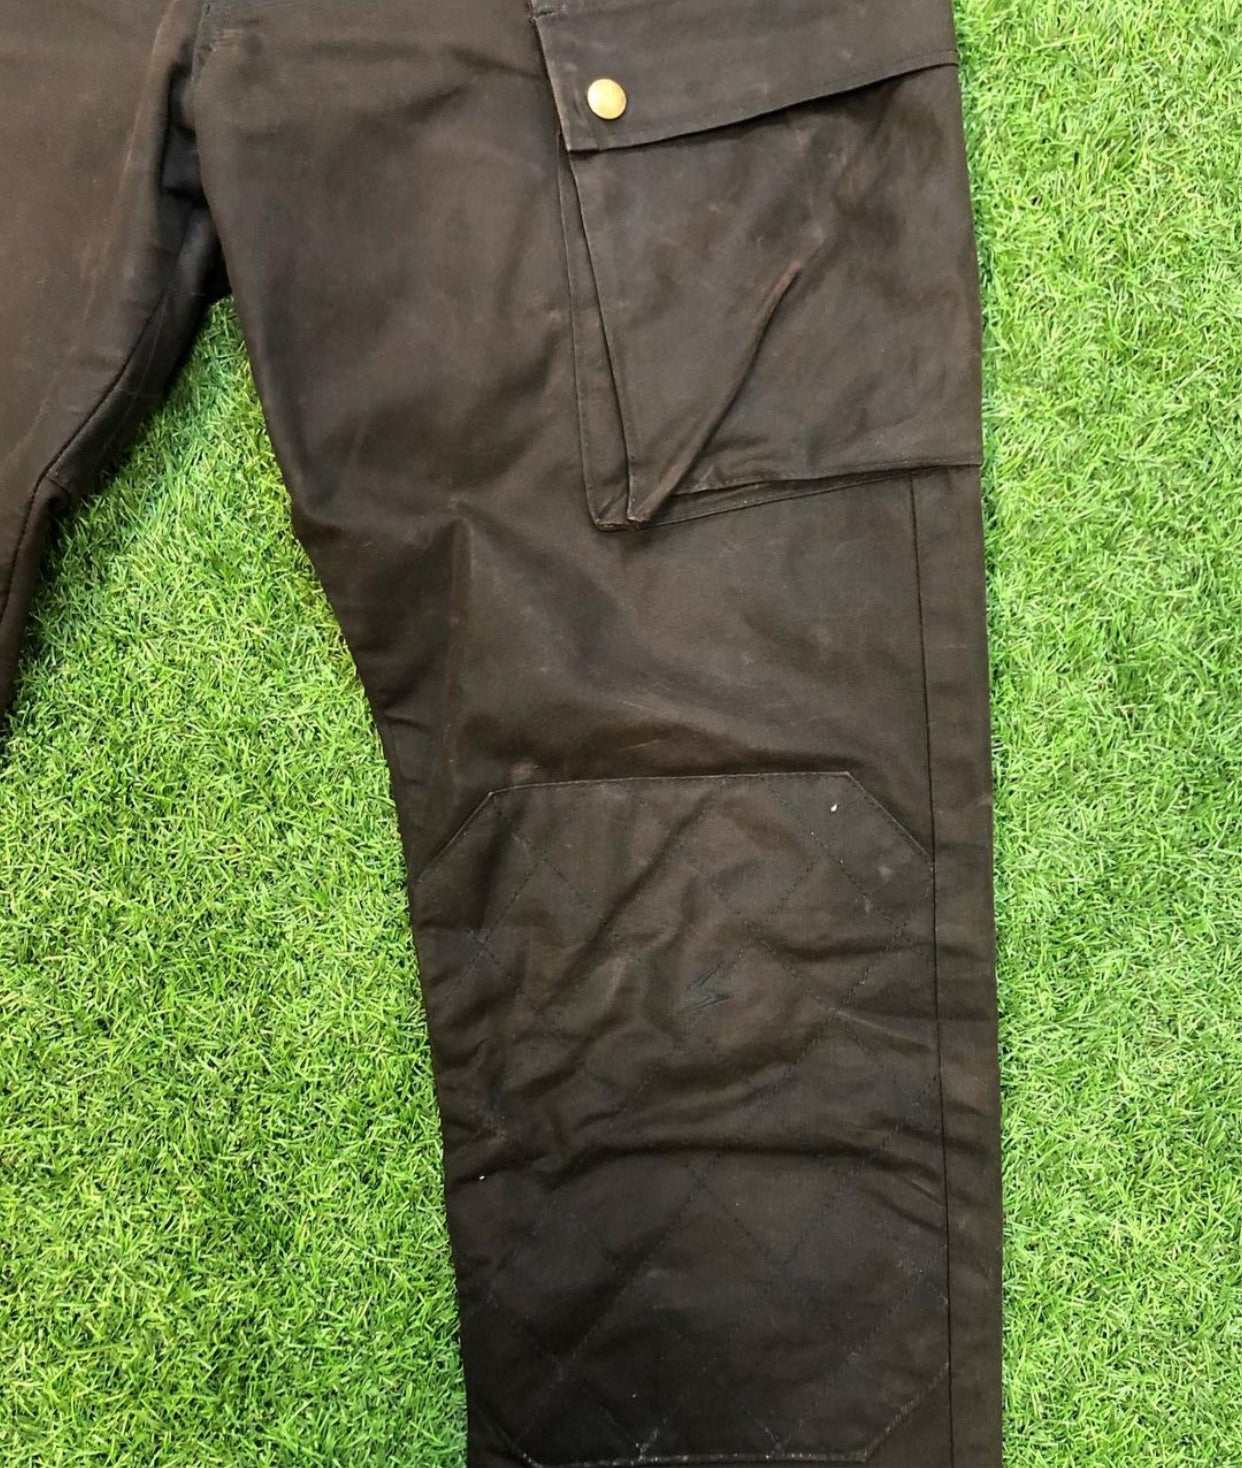 Undercover Wax Oil Cargo Pant